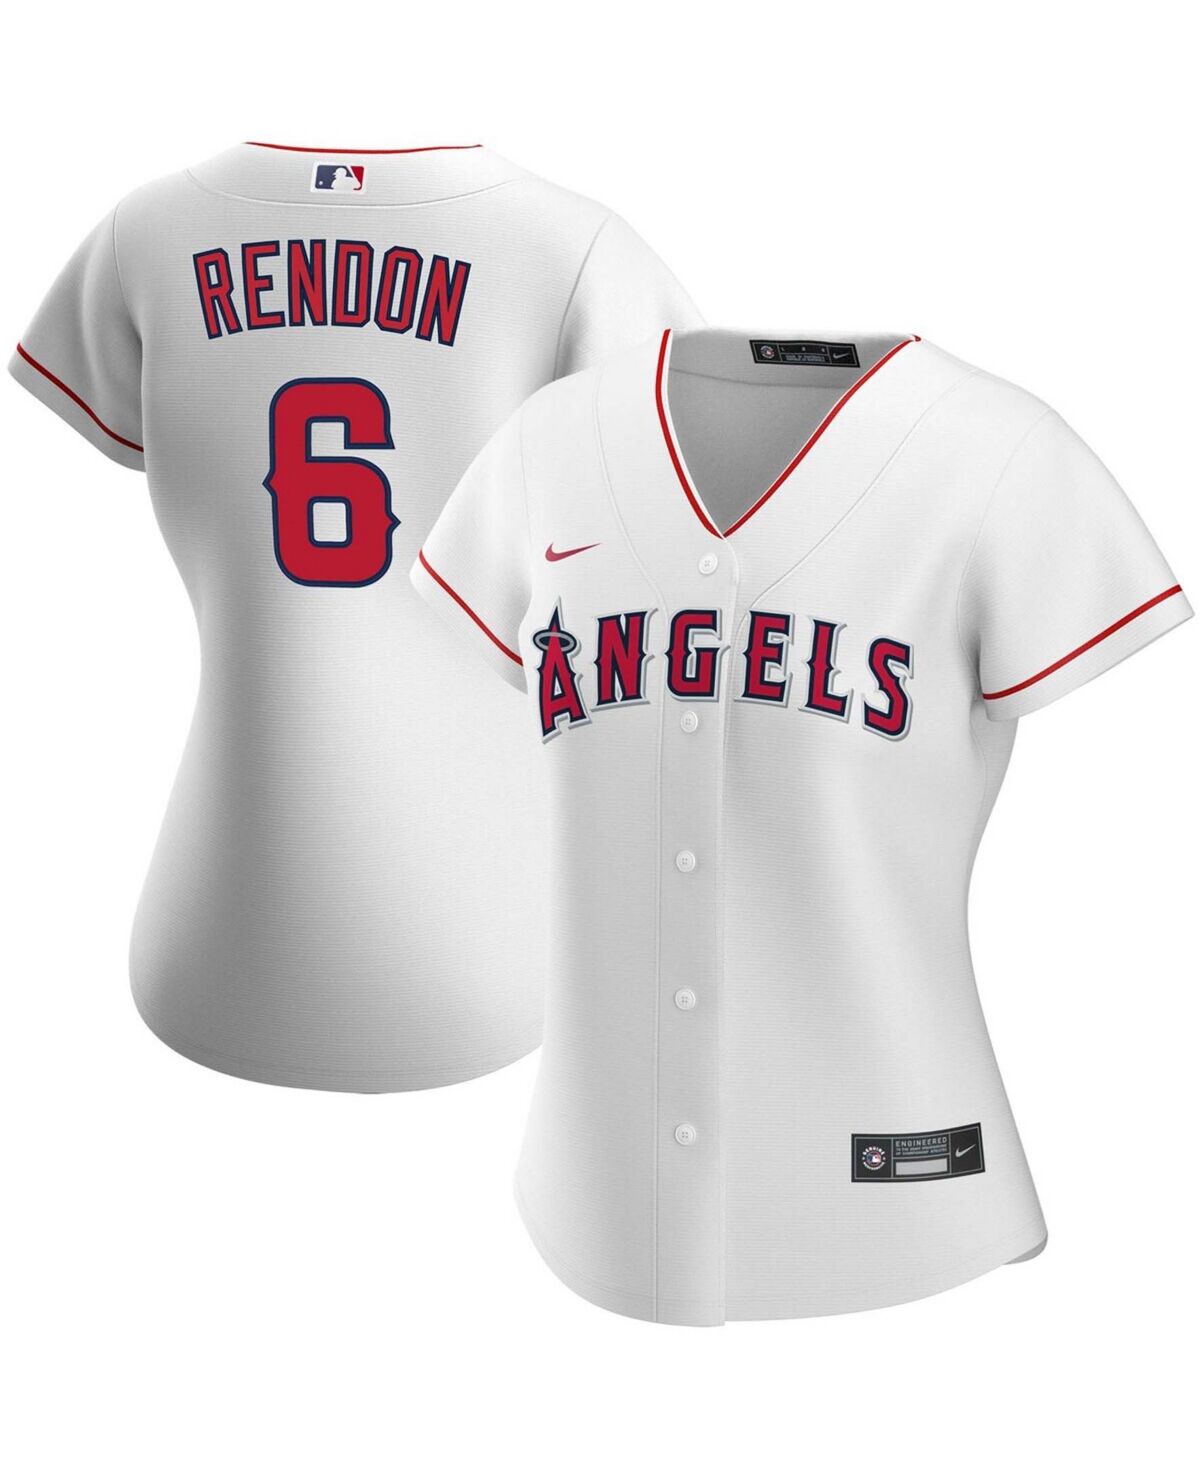 Nike Women's Anthony Rendon White Los Angeles Angels Home Replica Player Jersey - White